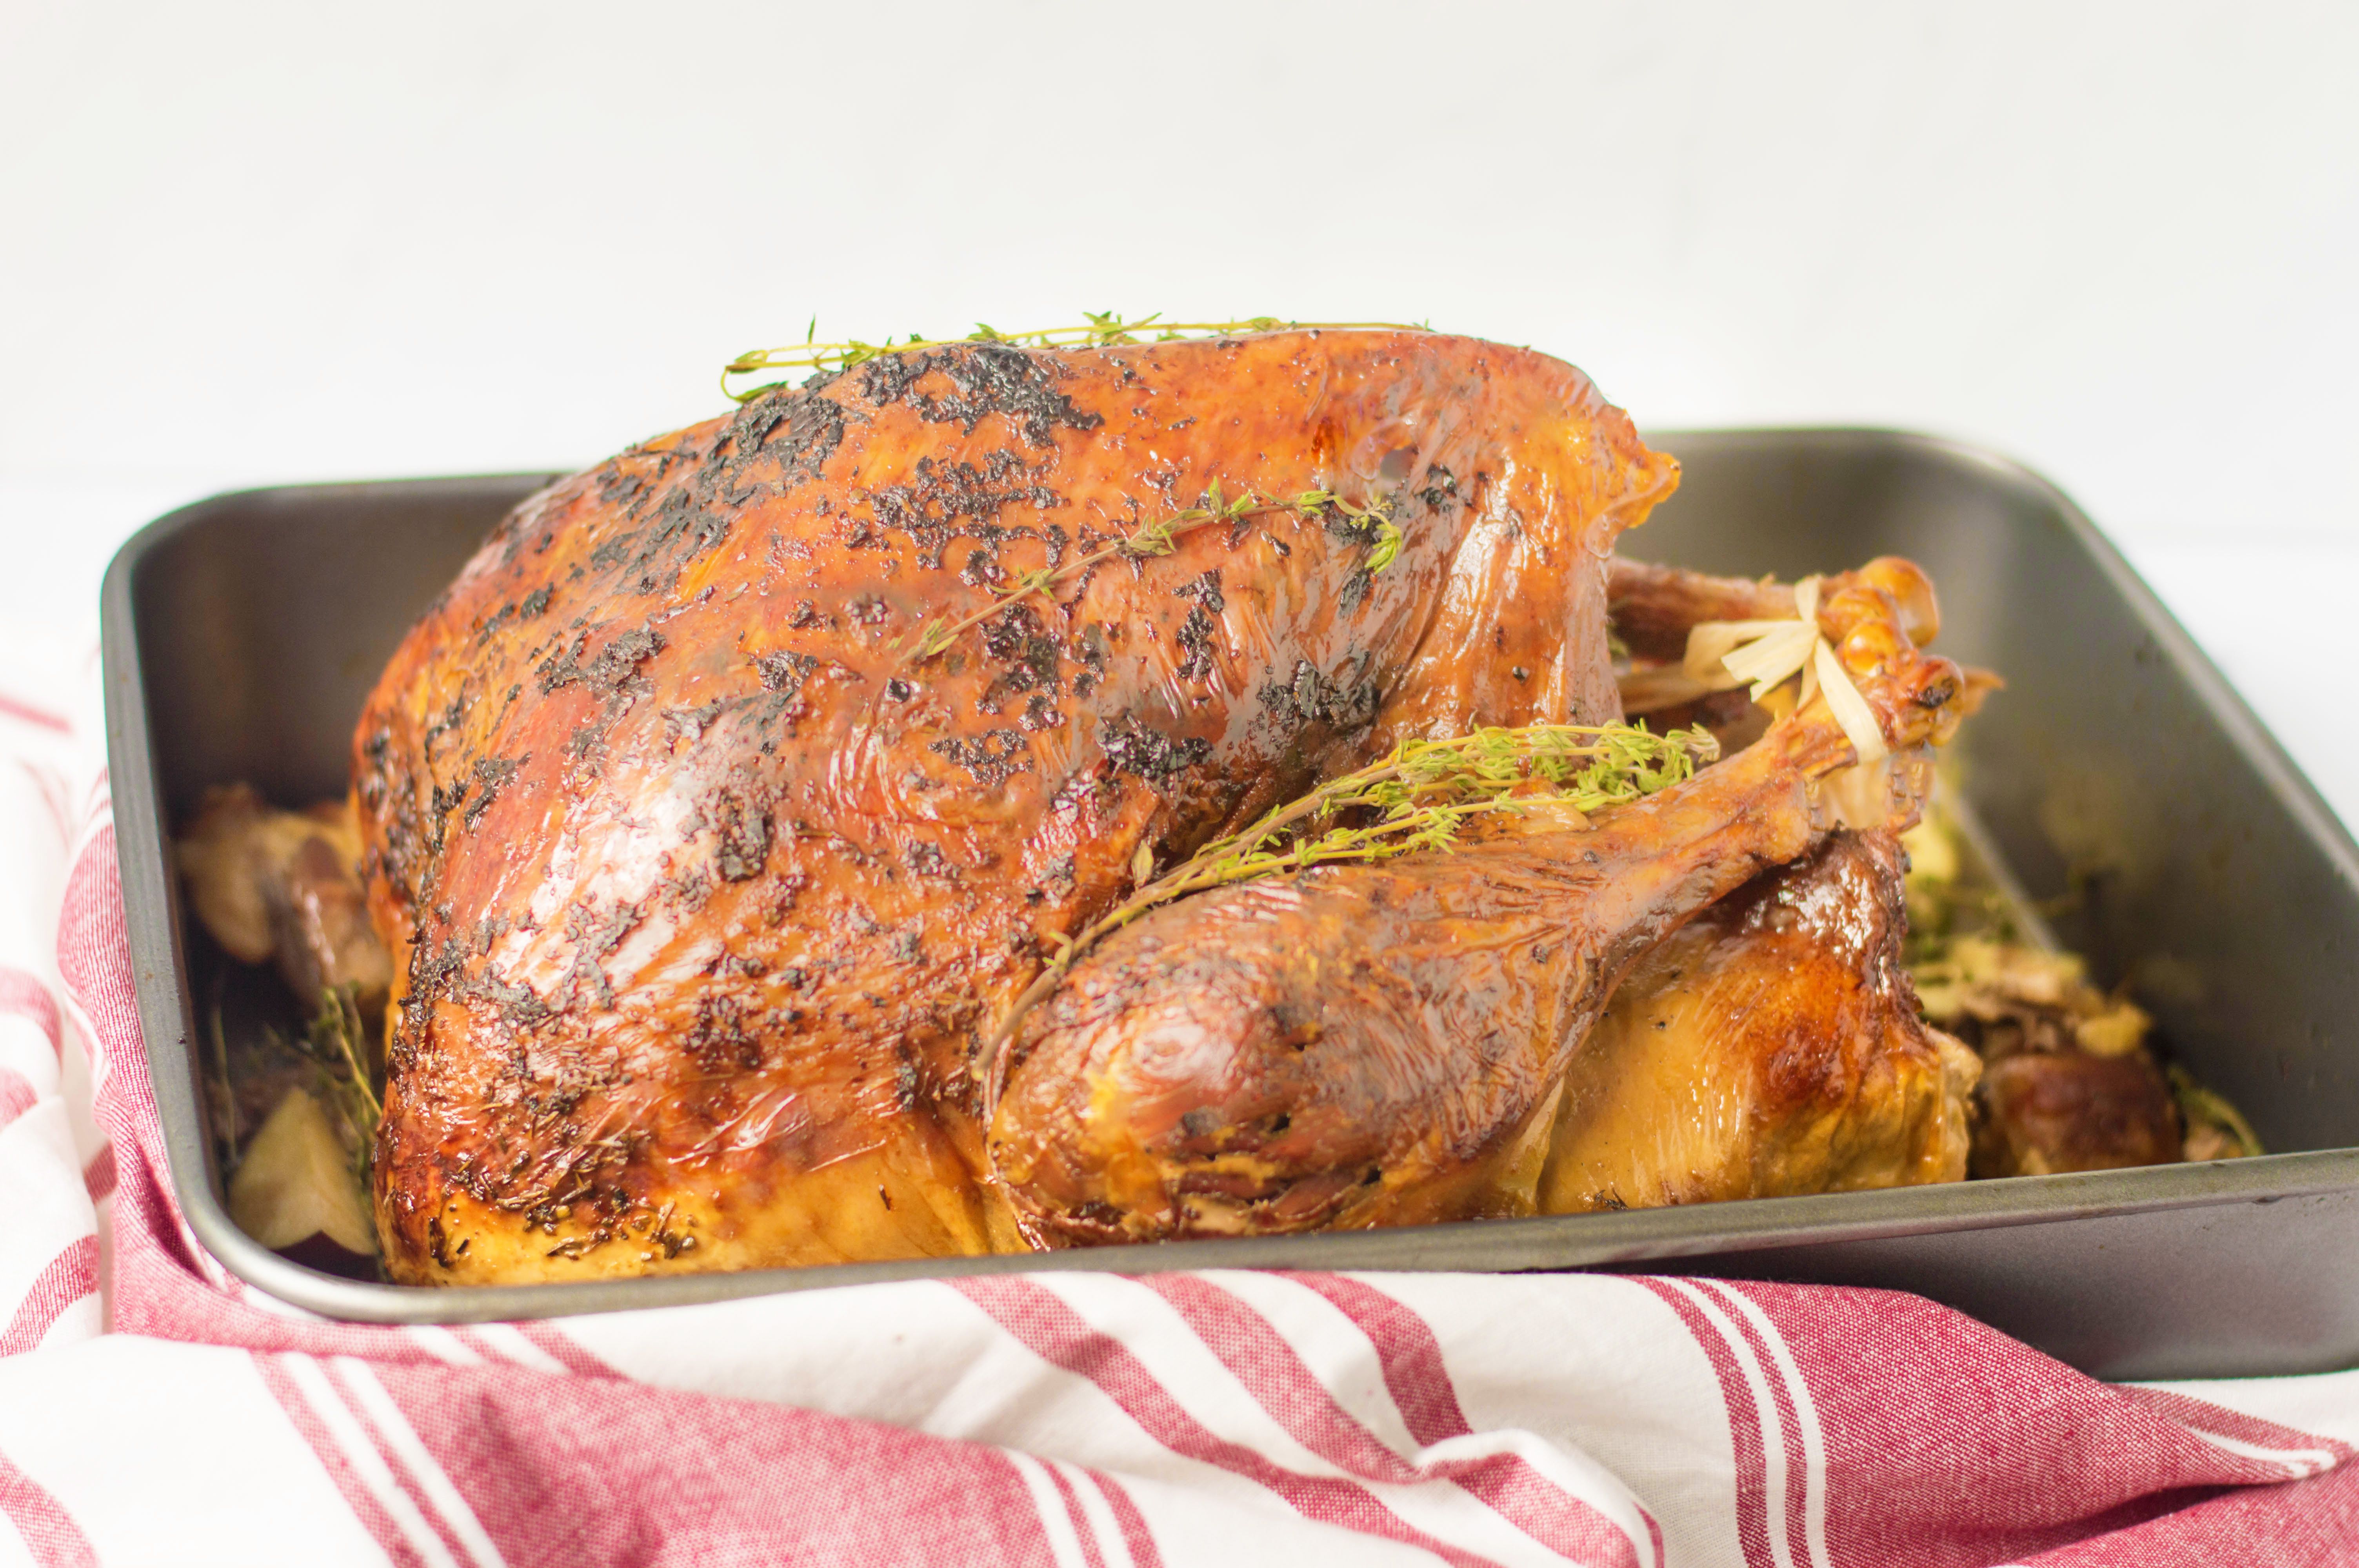 How To Cook Turkey In An Oven Bag Recipe